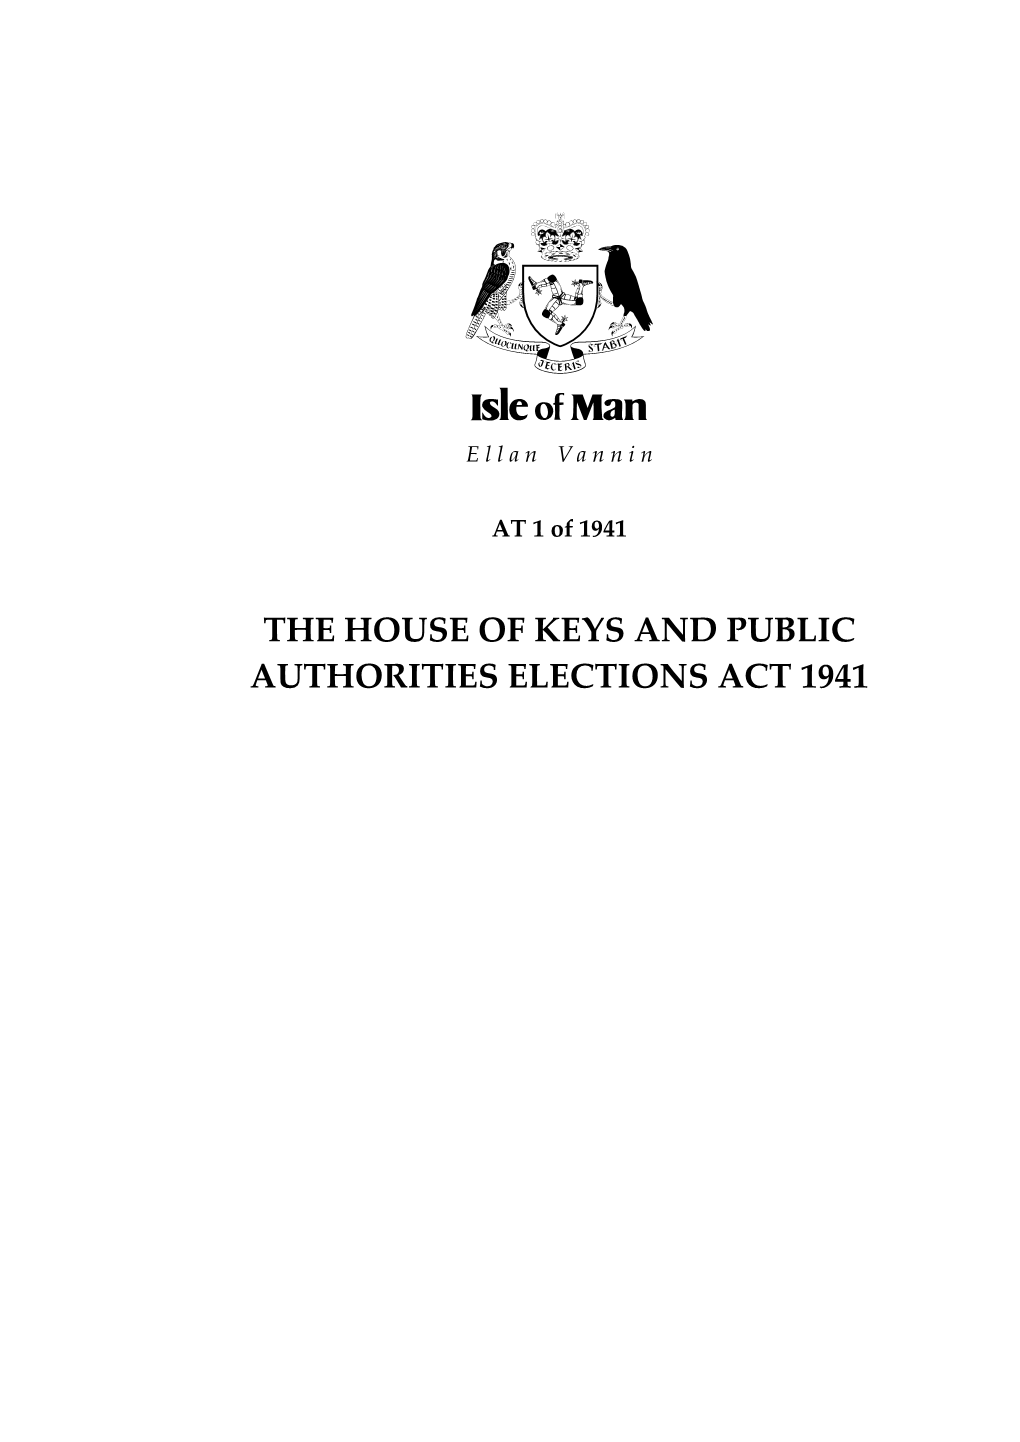 The House of Keys and Public Authorities Elections Act 1941